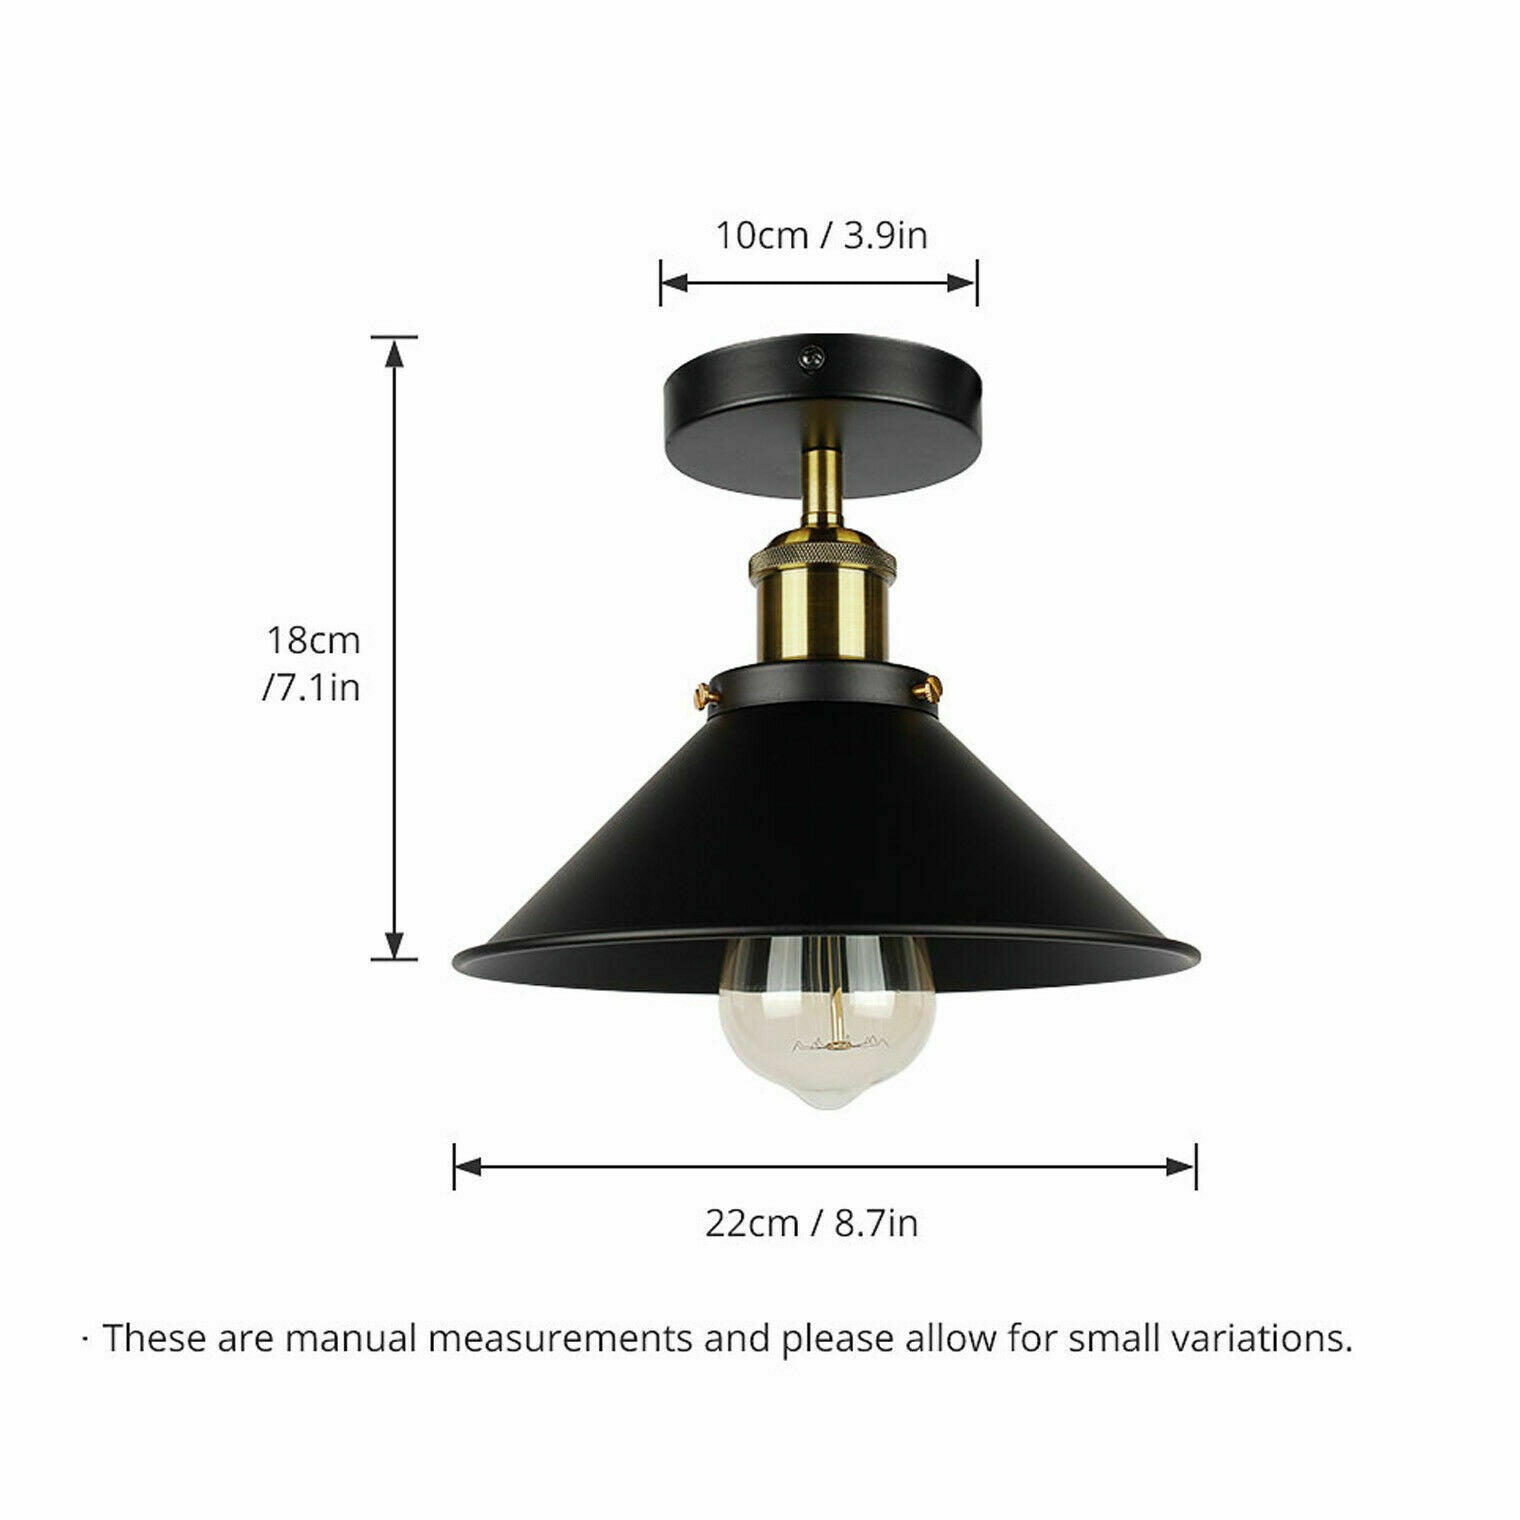  Living Room Ceiling Lamp - Size  Image